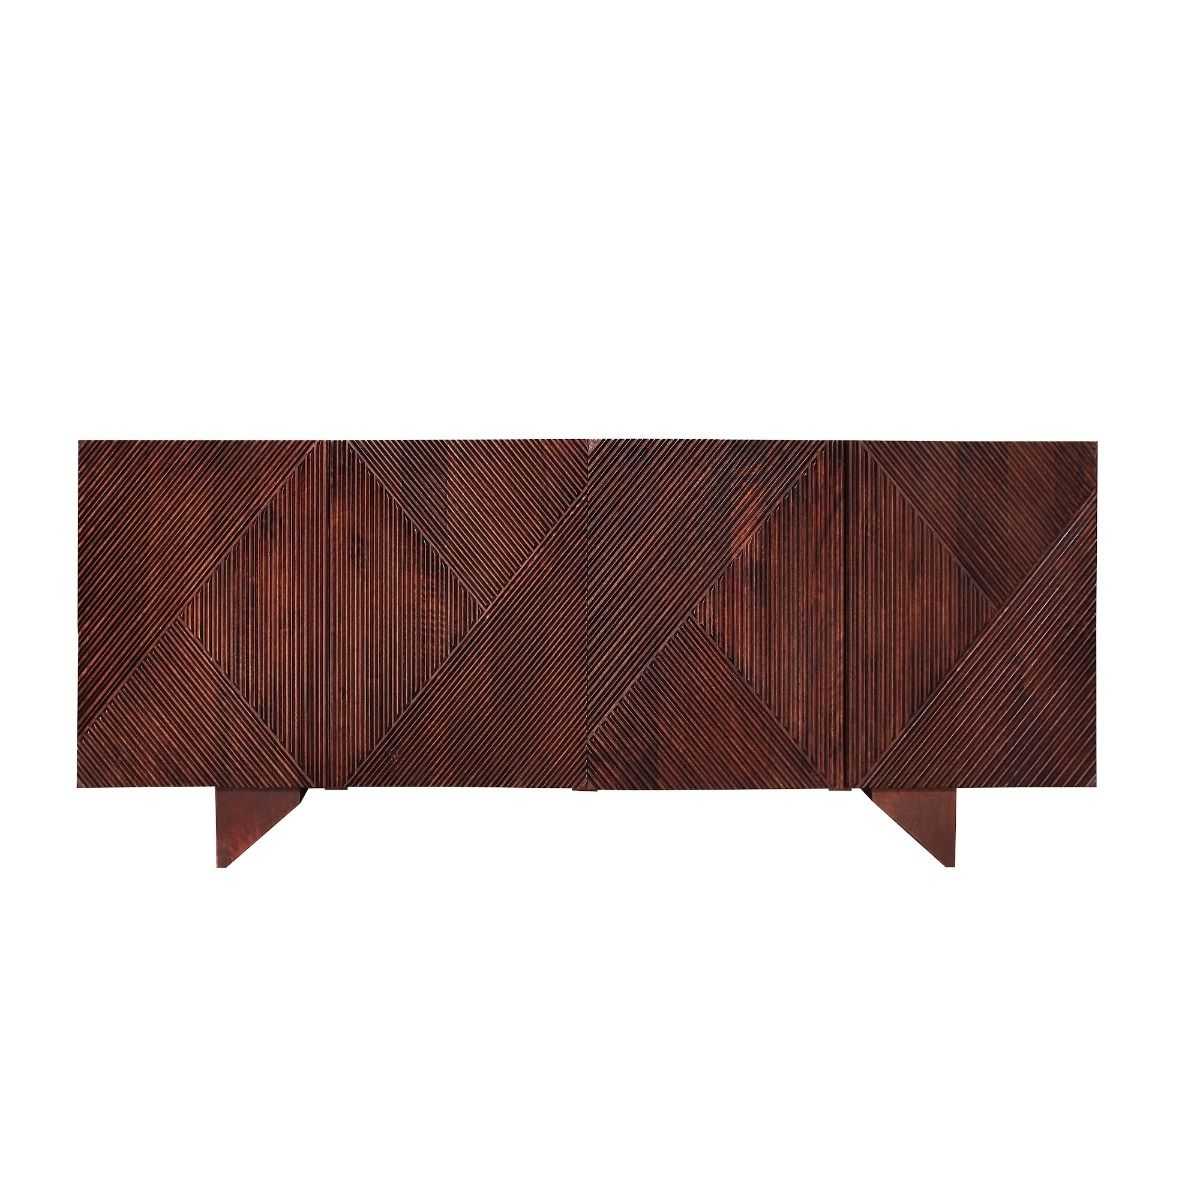 CR March Solid Timber Sideboard with 4 Doors